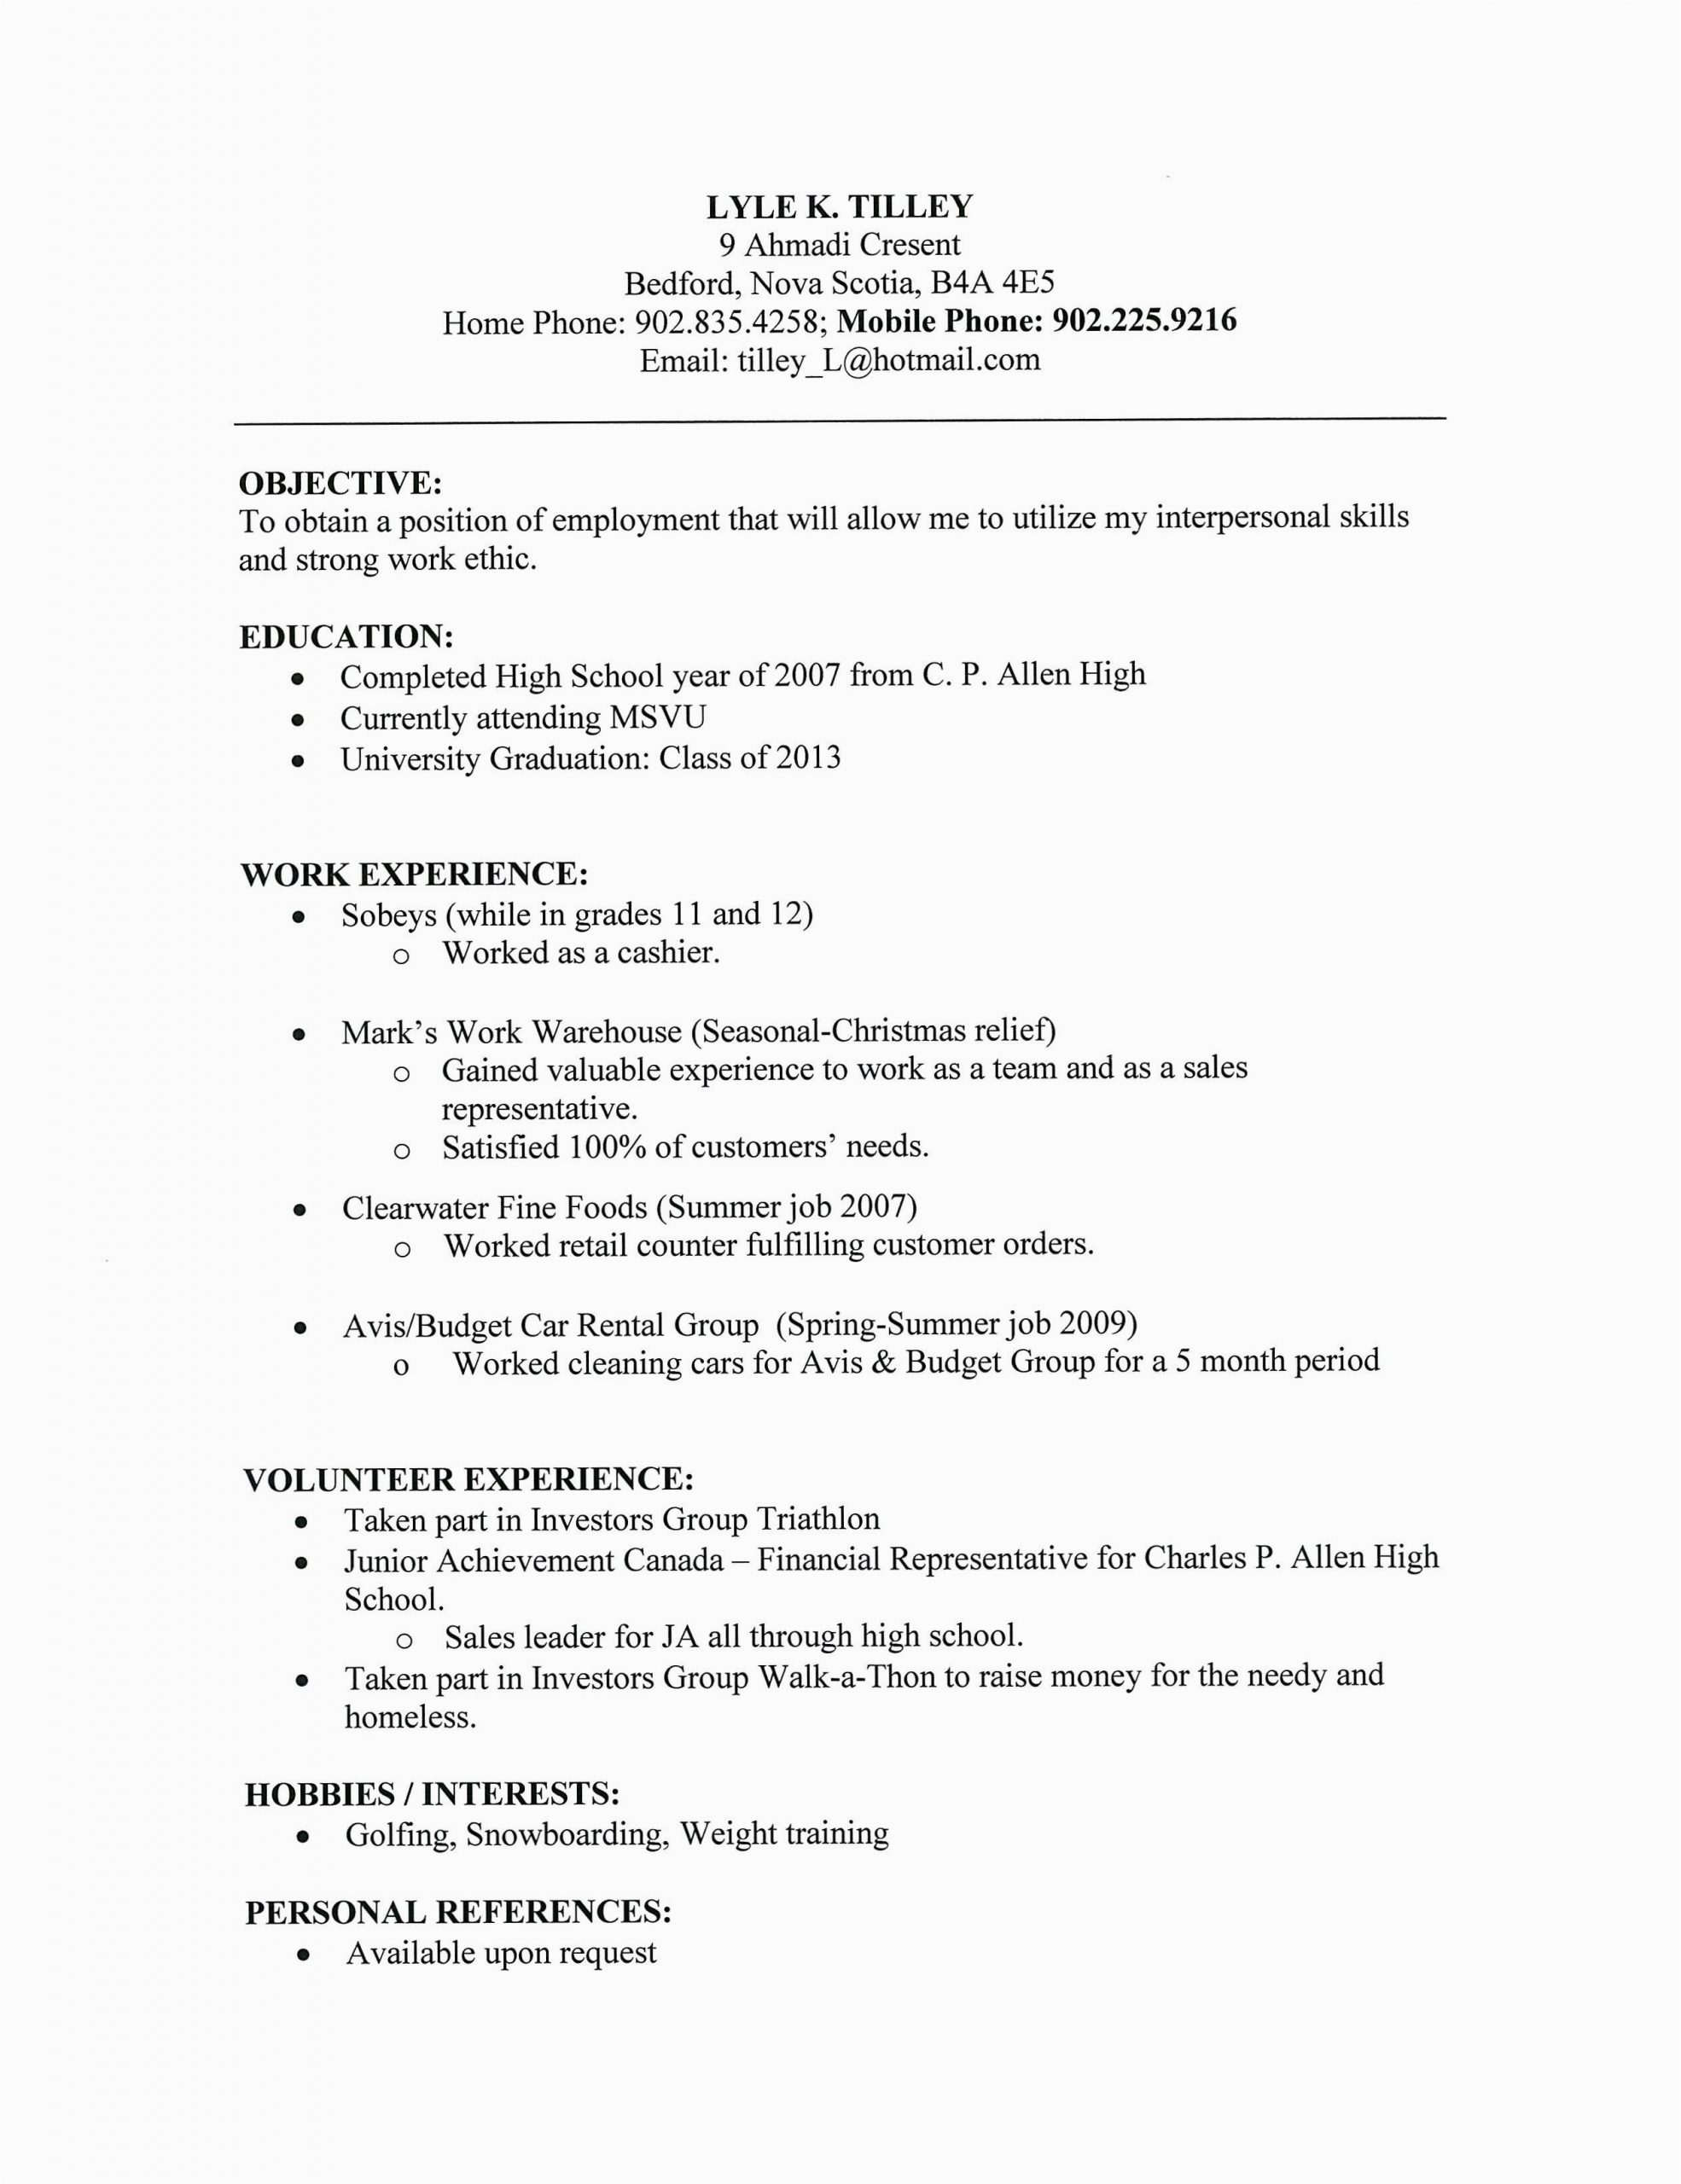 Sample Resume for Highschool Students with Volunteer Experience 69 Cool Sample Resume for Highschool Students